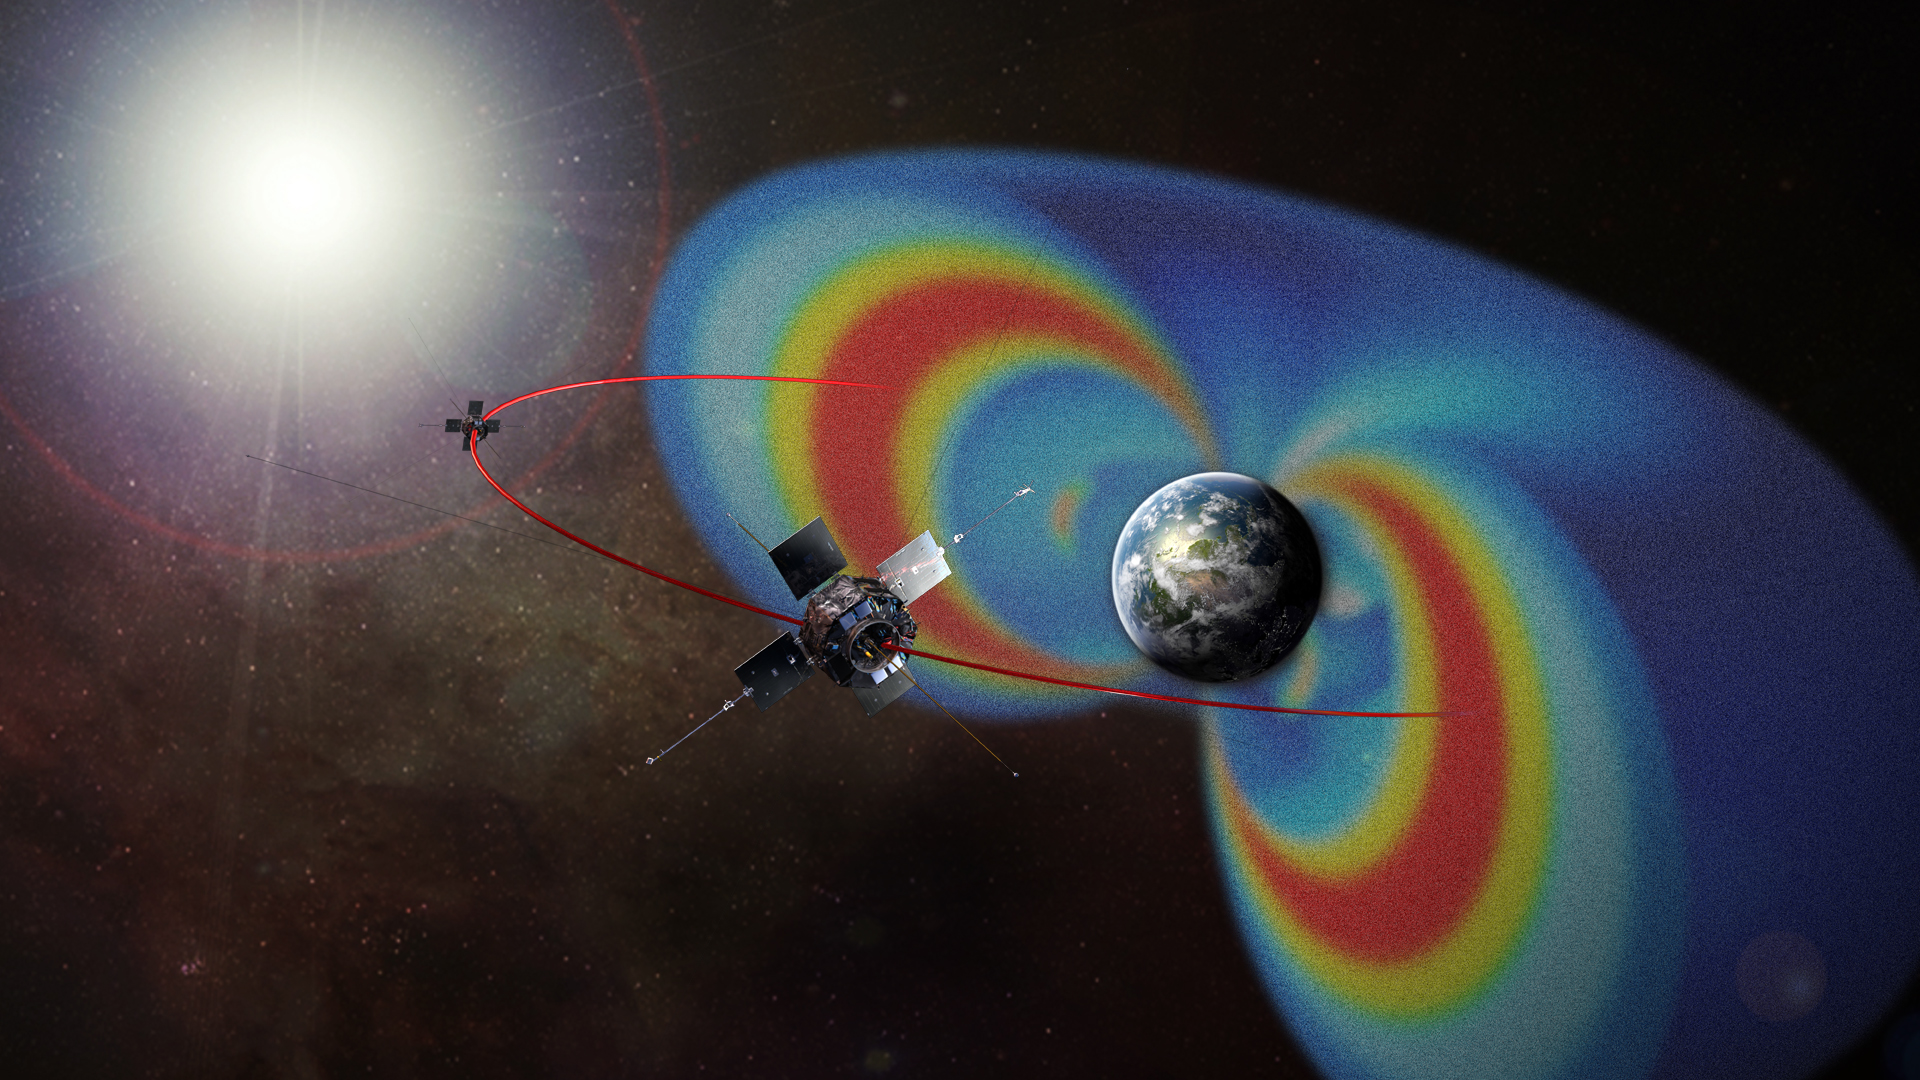 The first radiation belt spotted outside of our solar system is being seen by astronomers